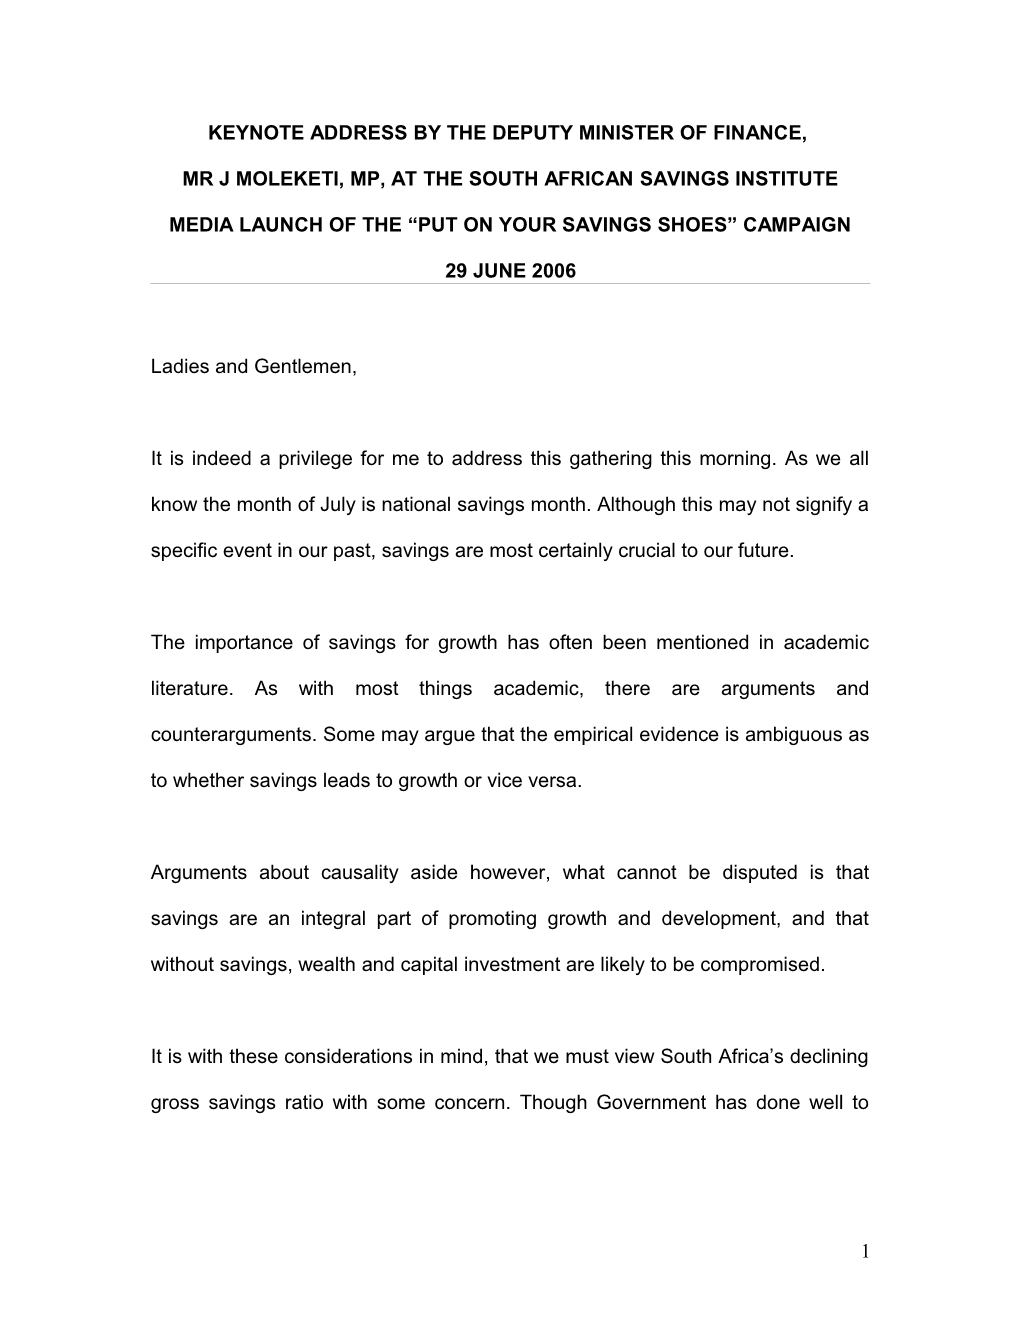 Ketnote Address by the Deputy Minister of Fiannce, Mr J Moleketi, Mp at the South African